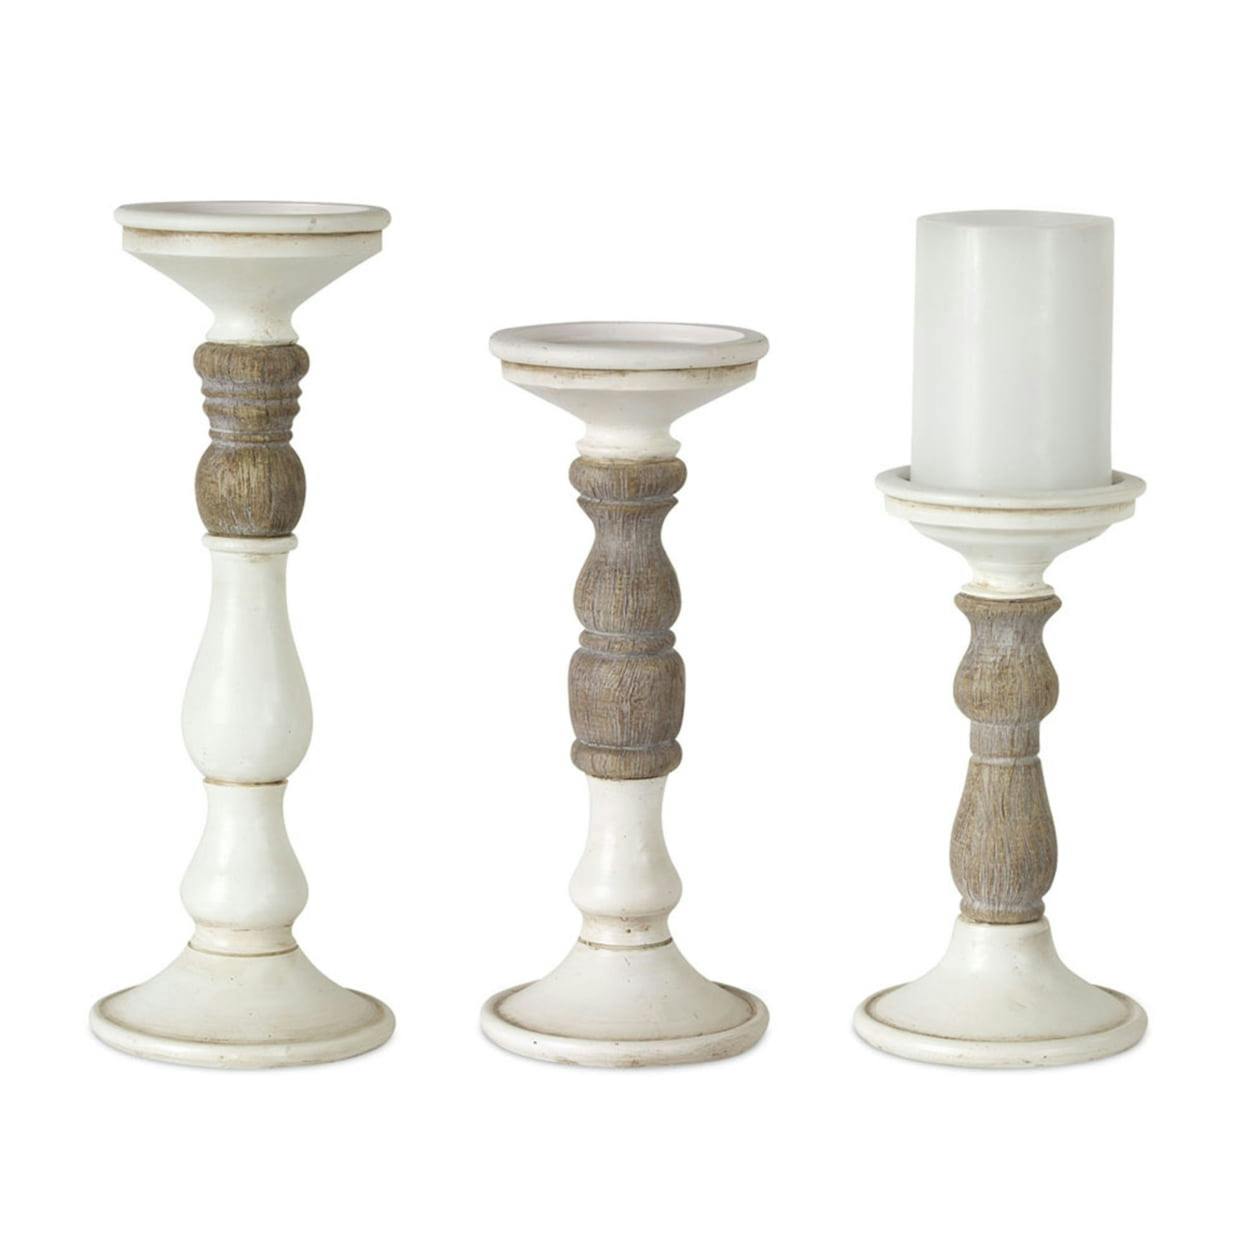 Rustic Ivory and Faux-Wood Candle Holder Set, 3 Sizes